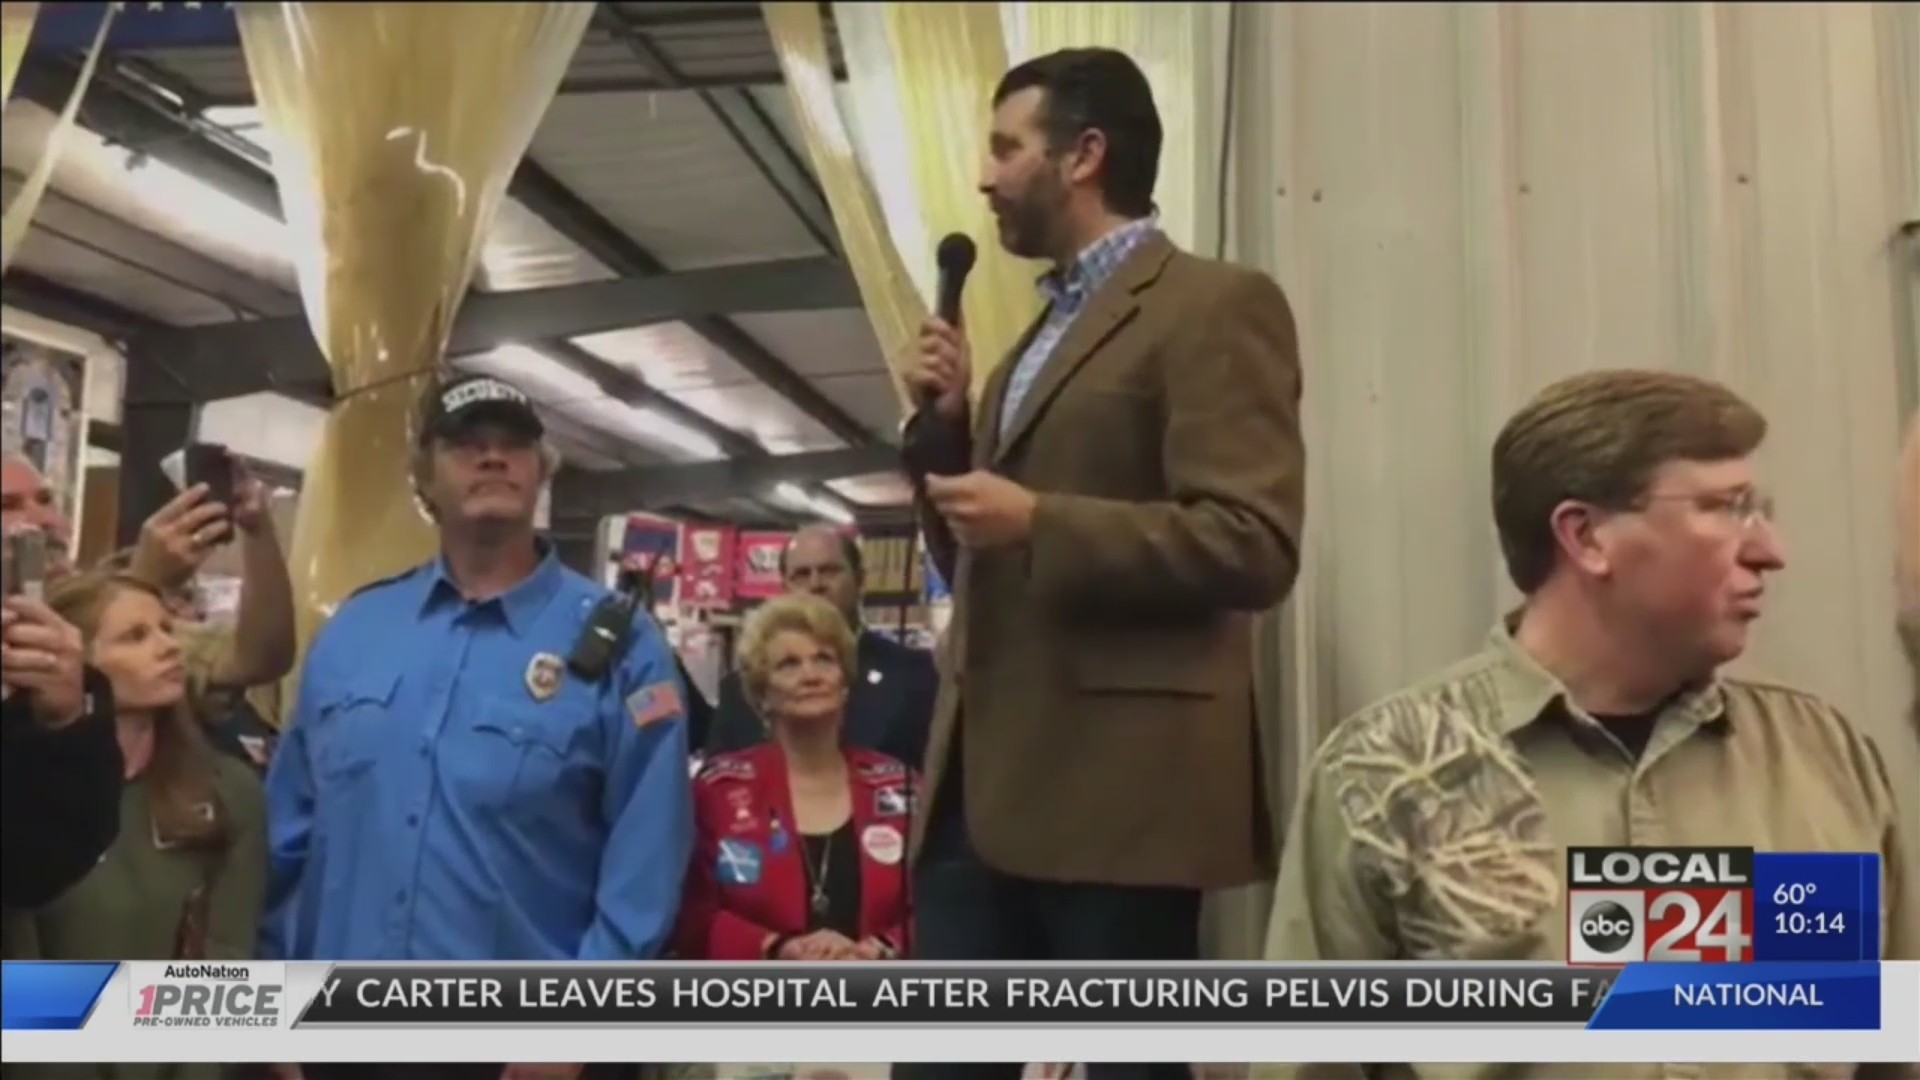 Donald Trump, Jr., in Oxford to campaign for Republican candidate for Mississippi governor